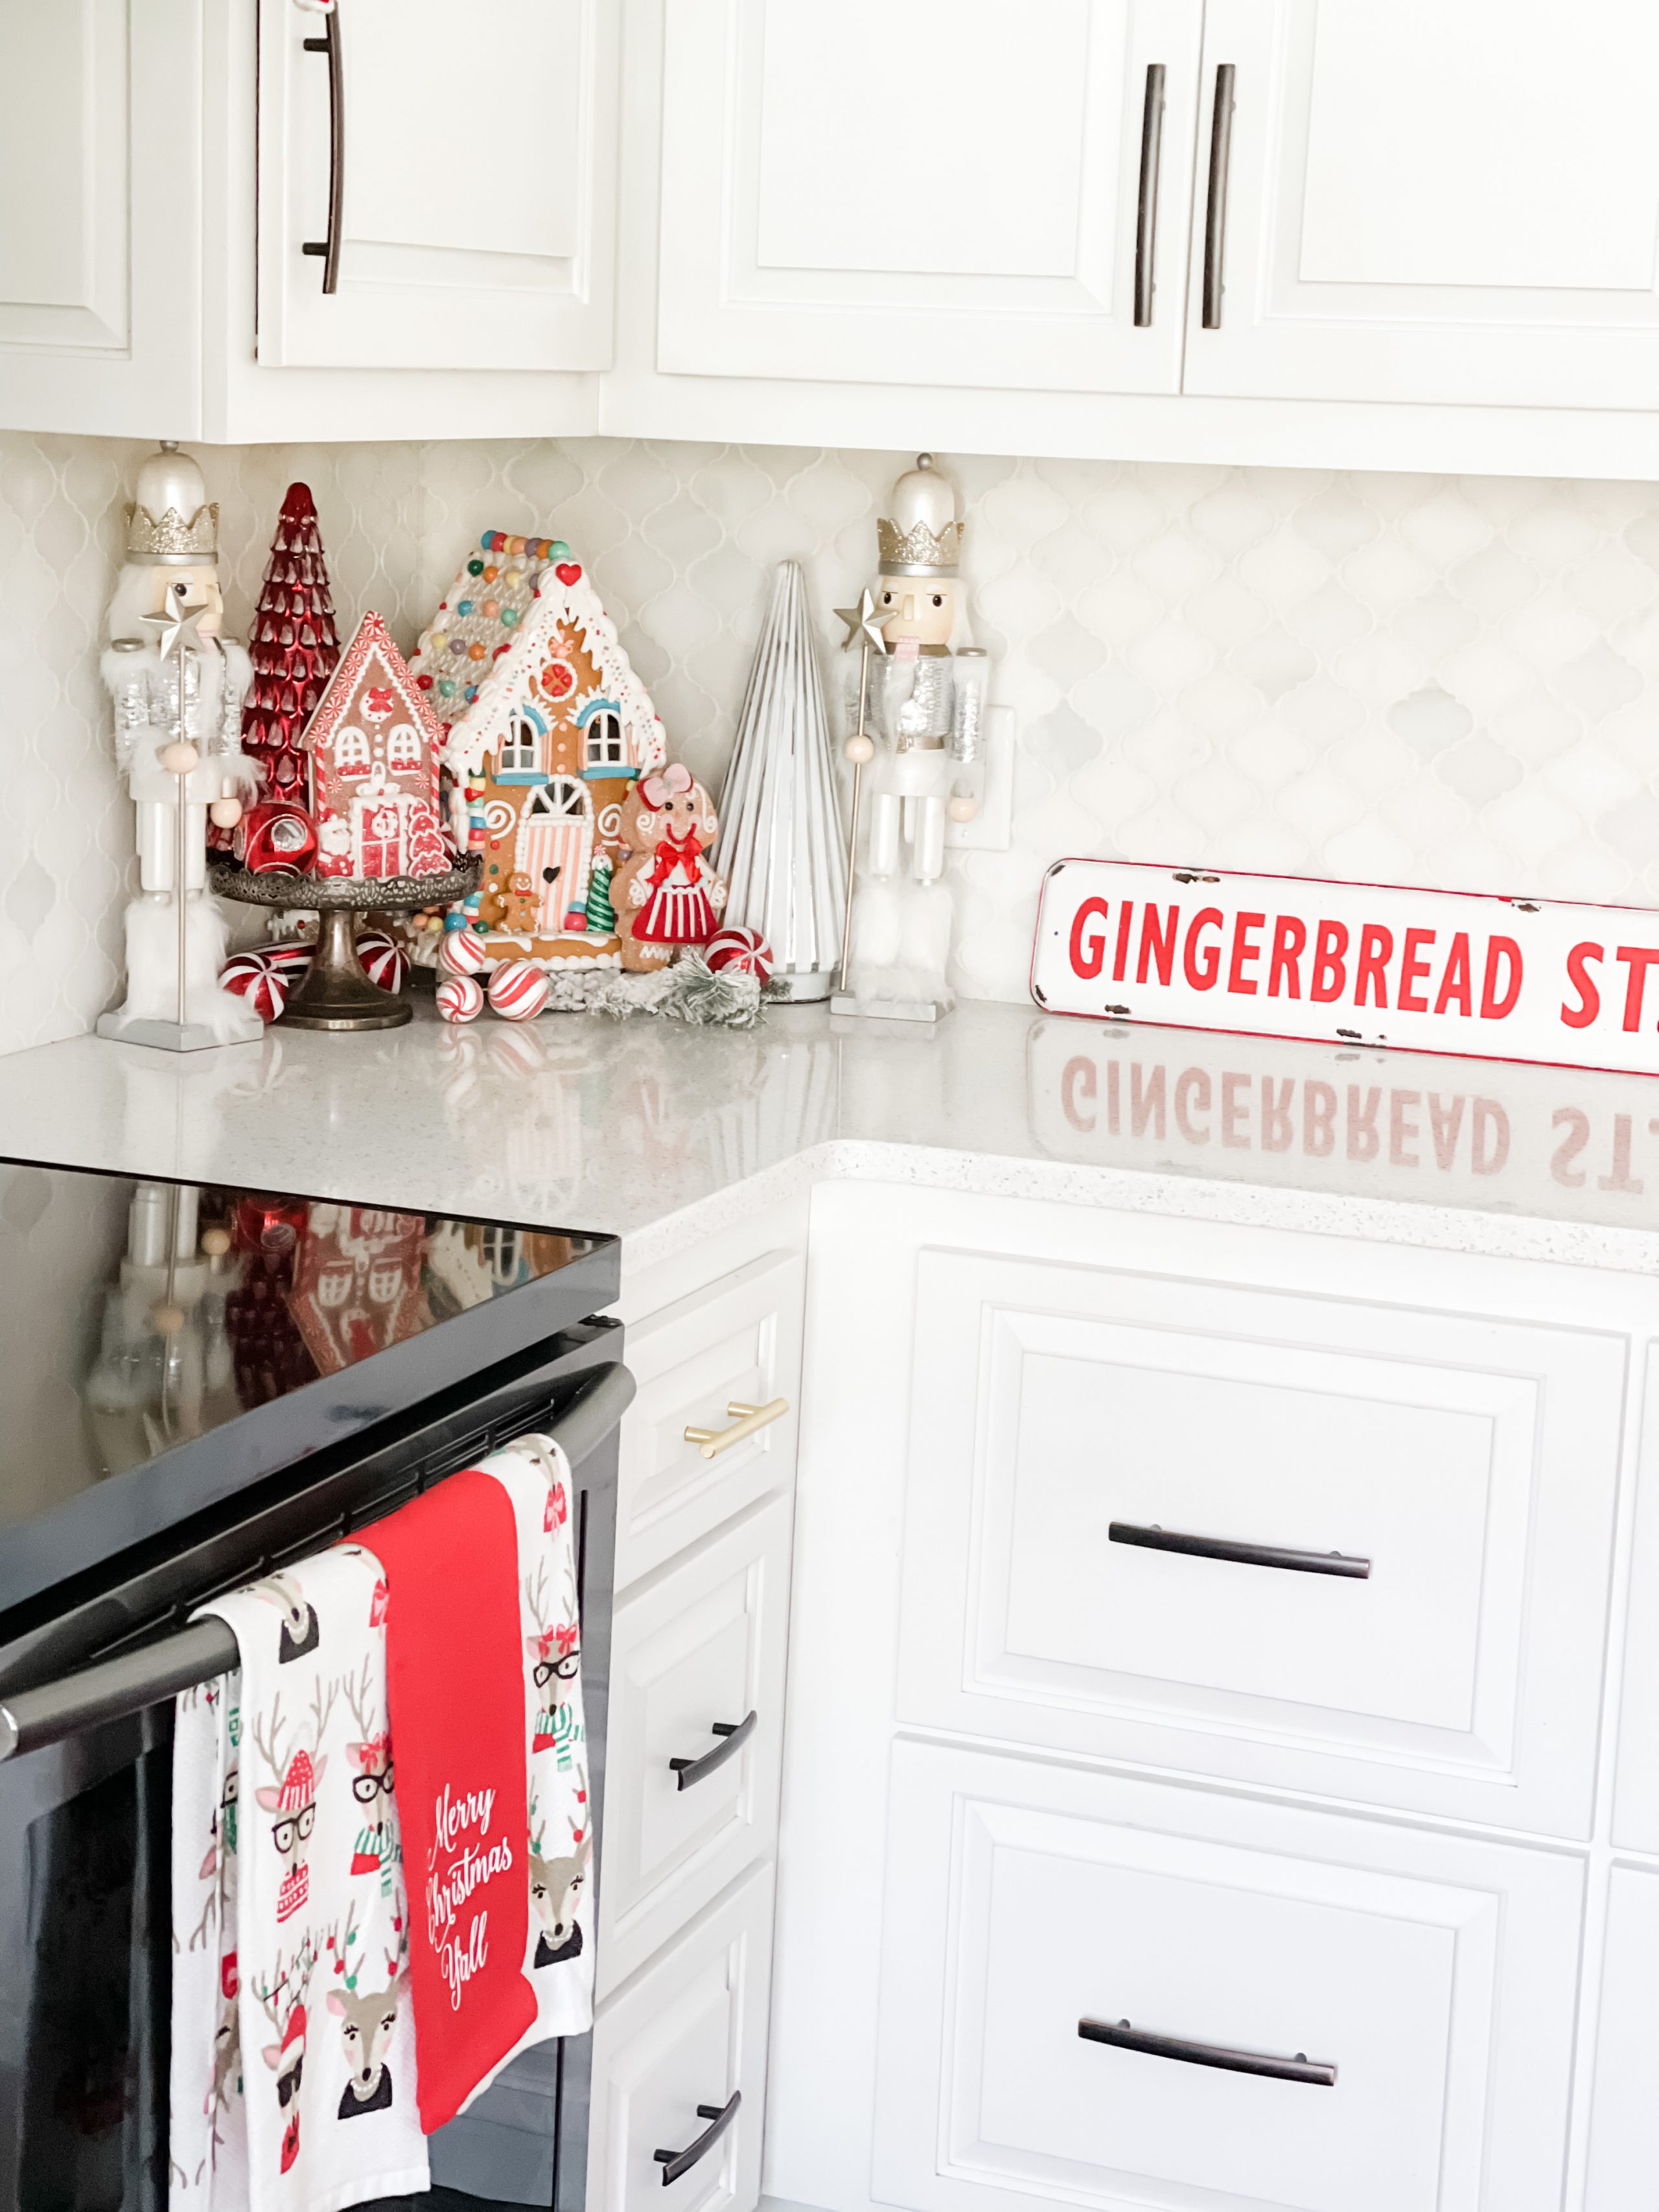 https://www.re-fabbed.com/wp-content/uploads/2021/11/christmas-kitchen-red-and-white-gingerbread8.jpg